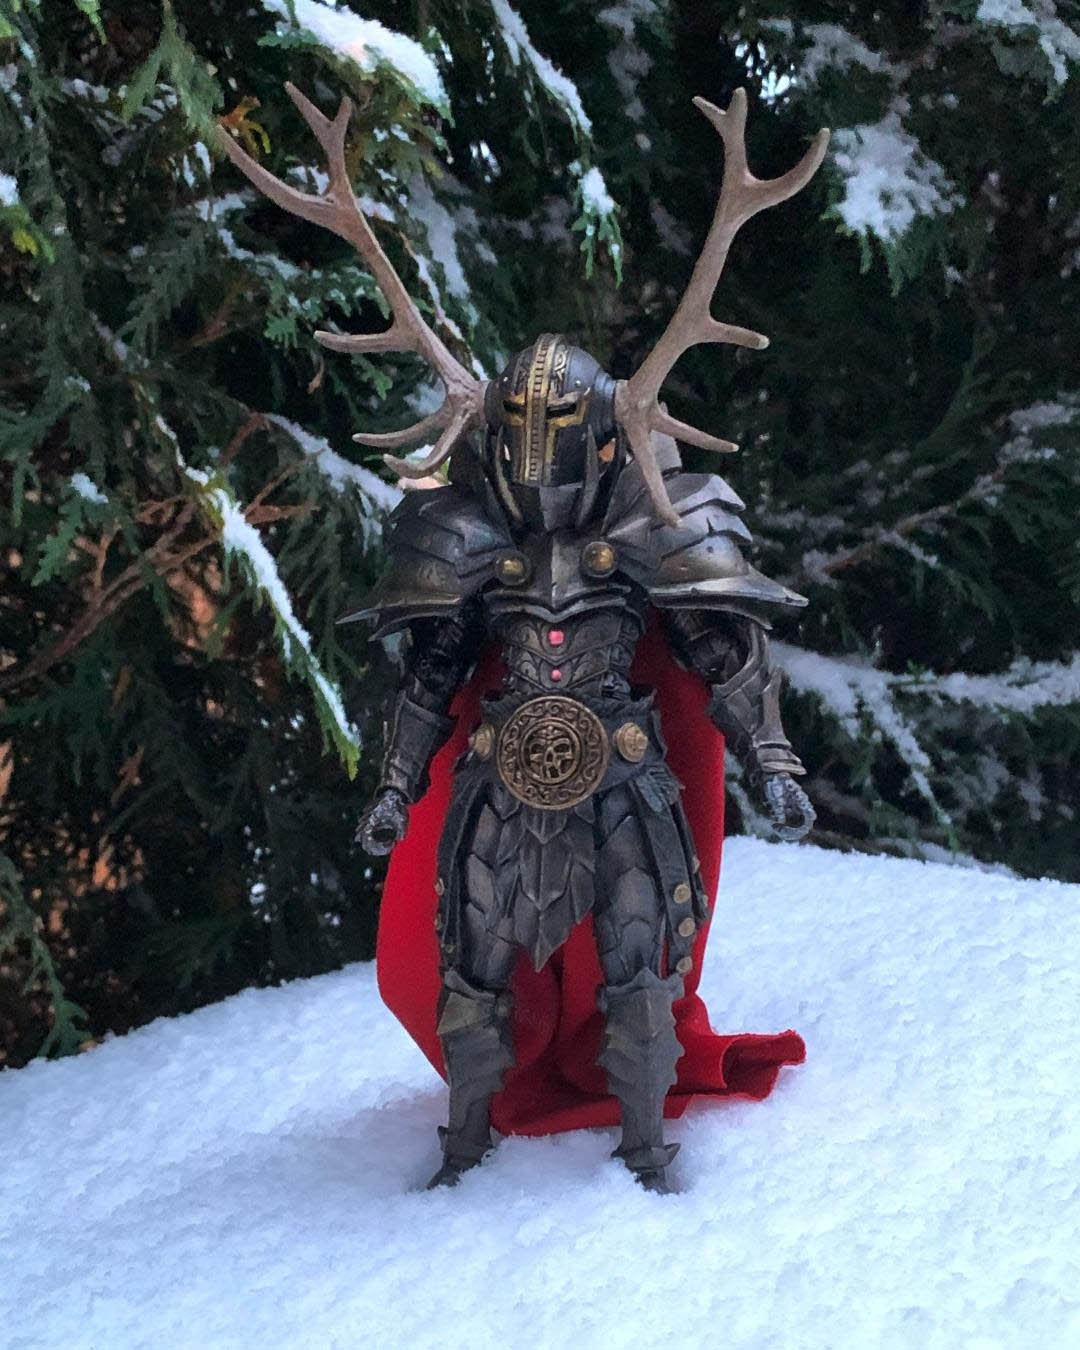 Mythic Legions customs figures from Dennis Derby